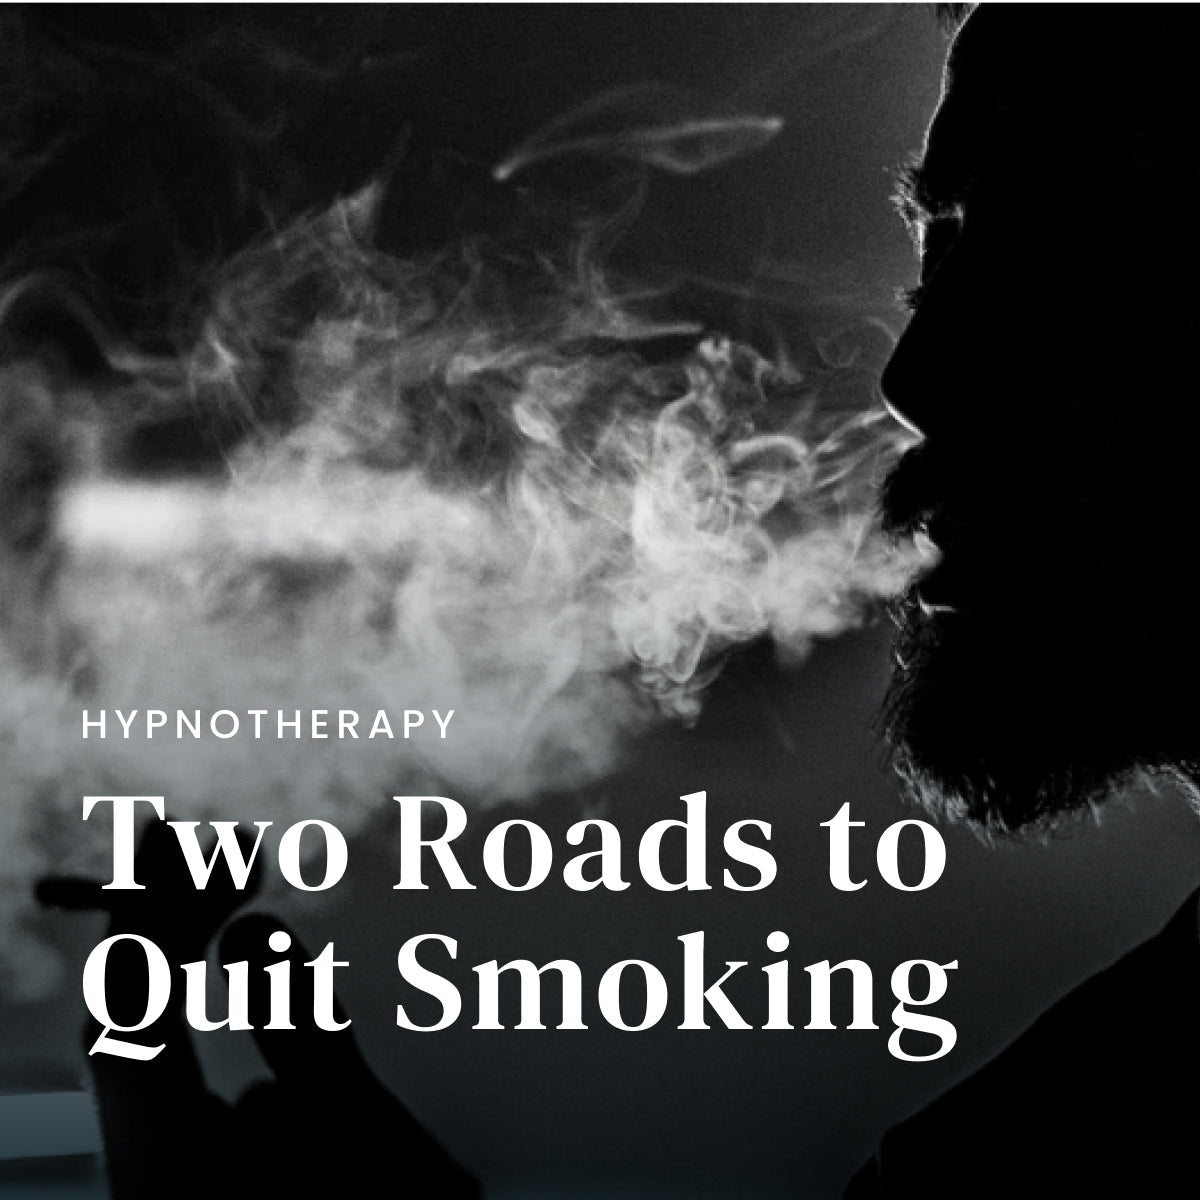 Two Roads to Quit Smoking